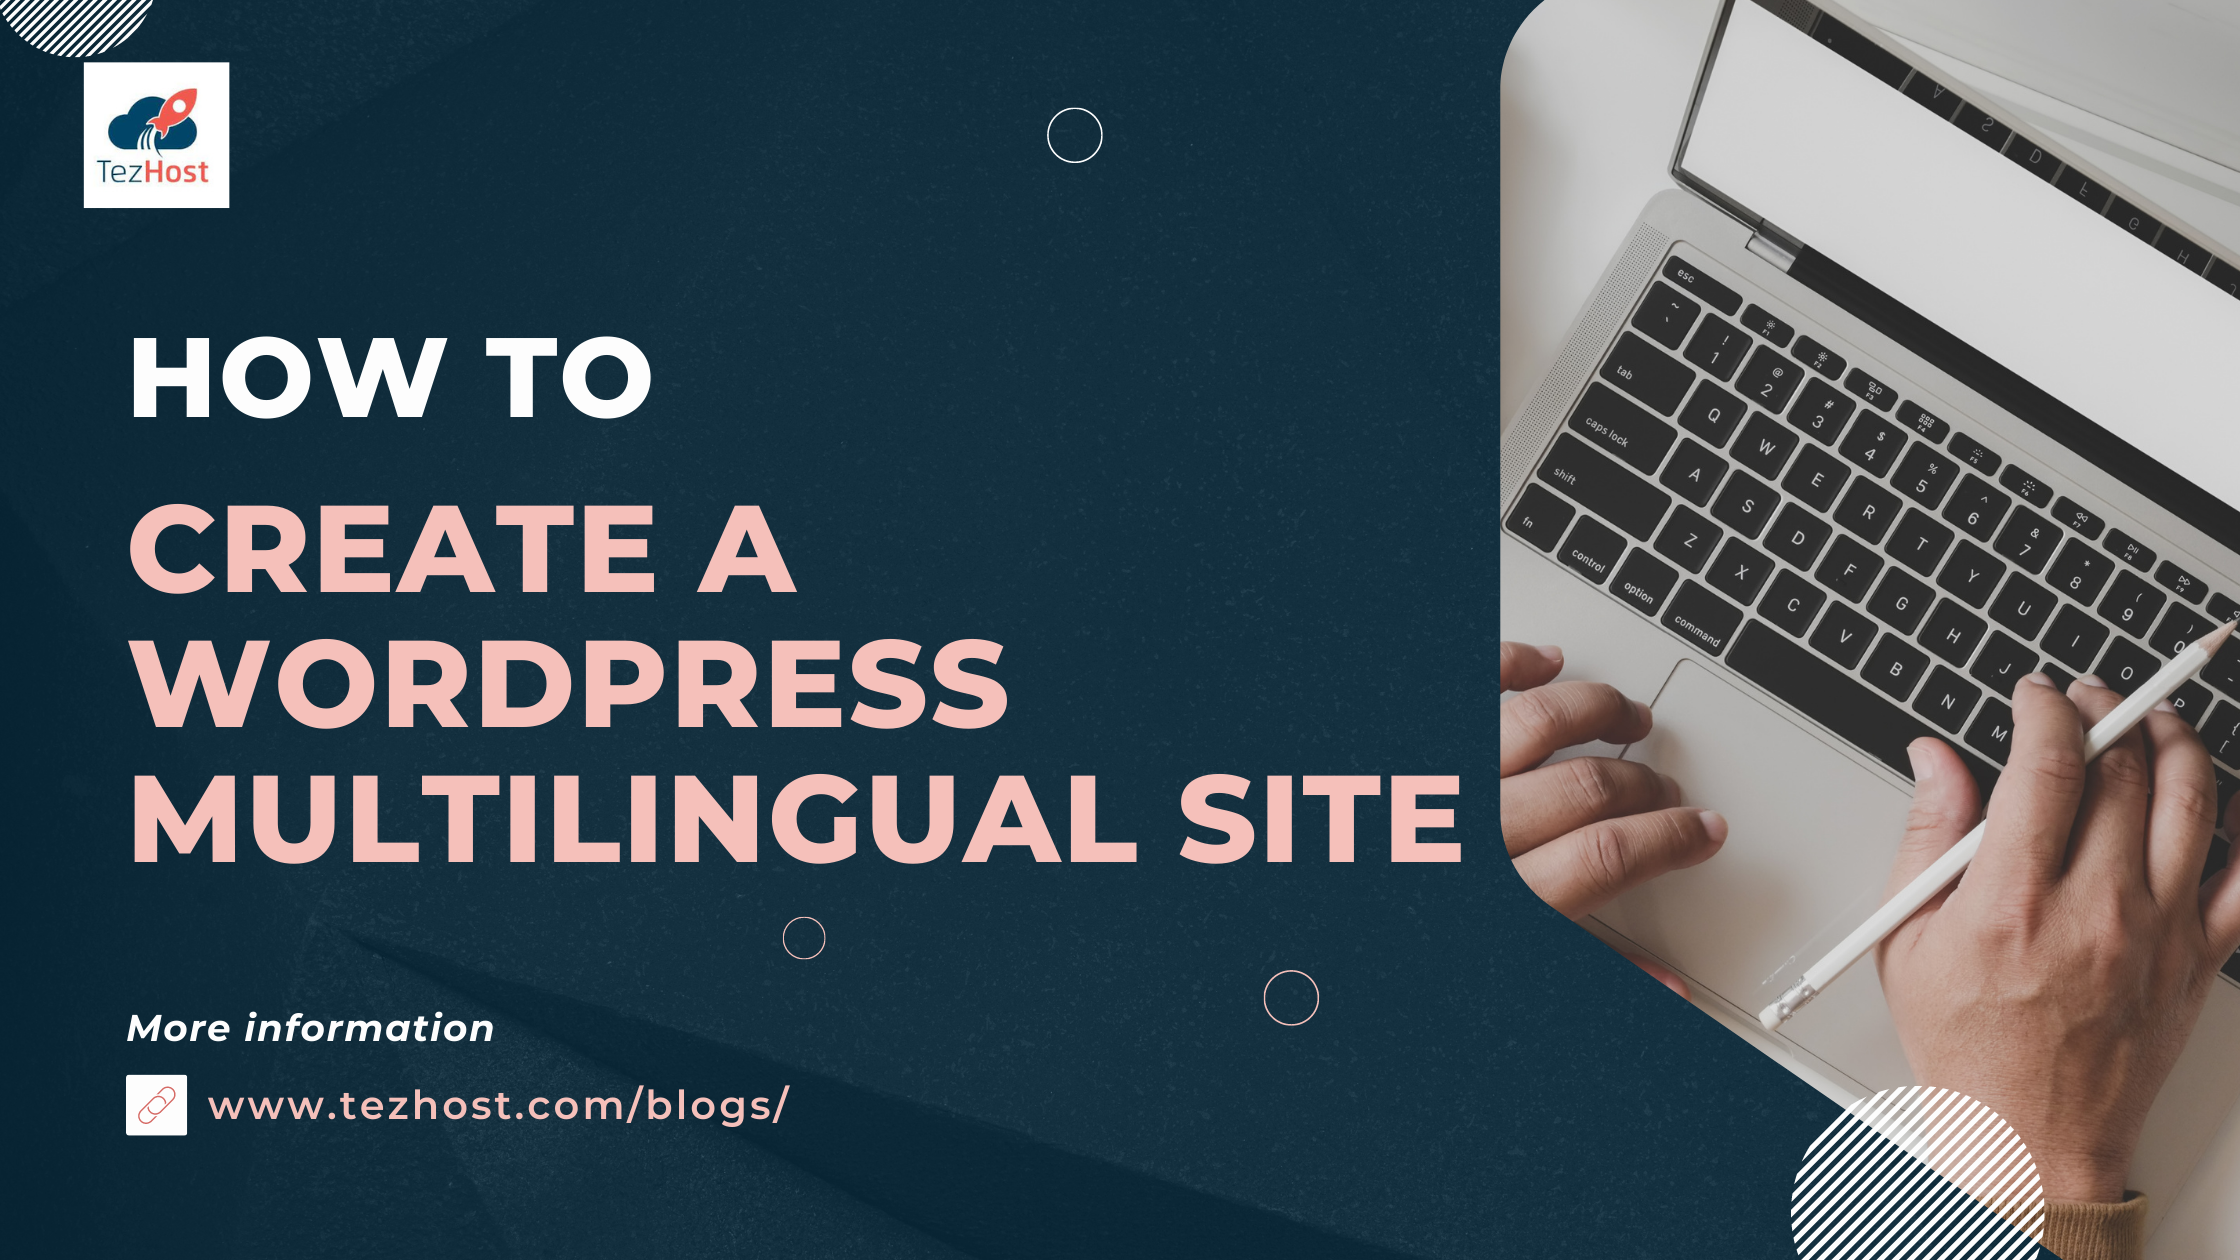 How-to-create-a-WordPress-Multiligual-site